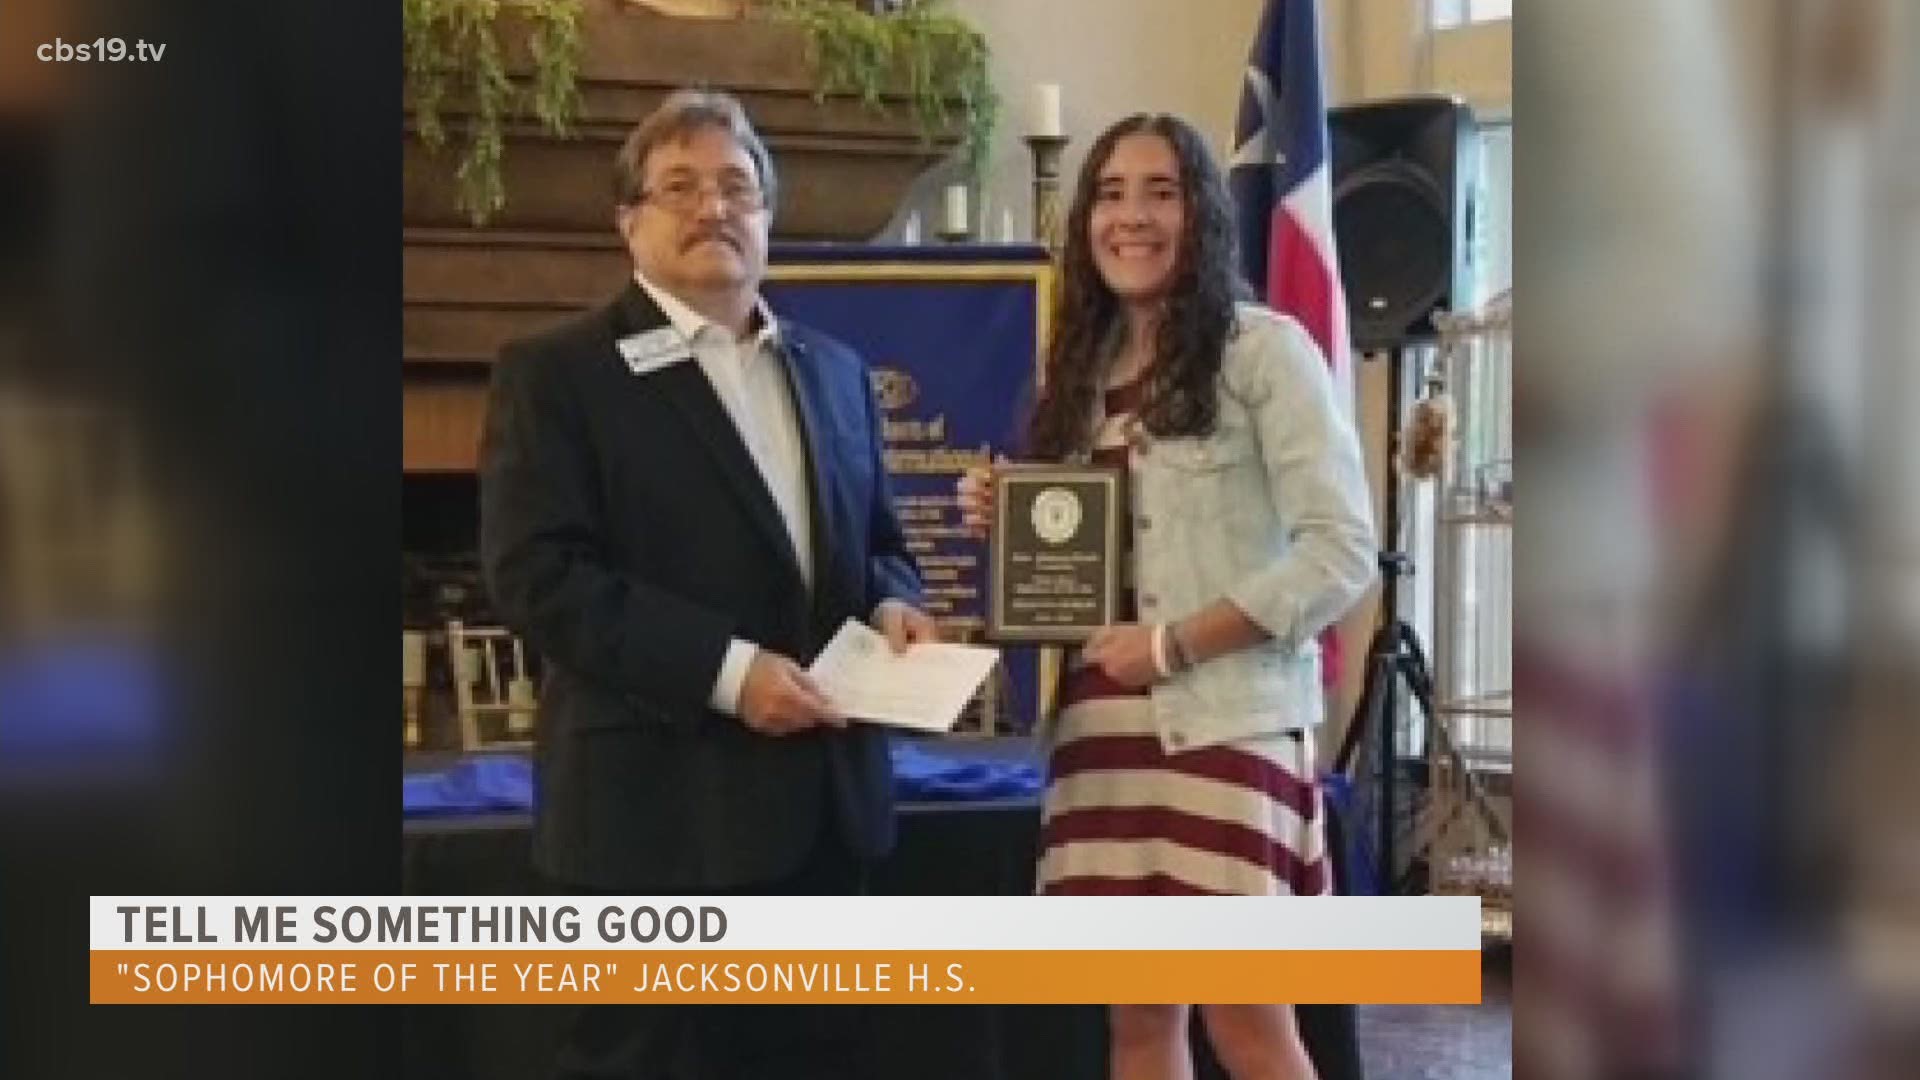 Julianna Dublin is a Jacksonville High School student who recently won the Walter Hurst Sophomore of the Year Award from the Texas-Oklahoma Kiwanis Foundation.